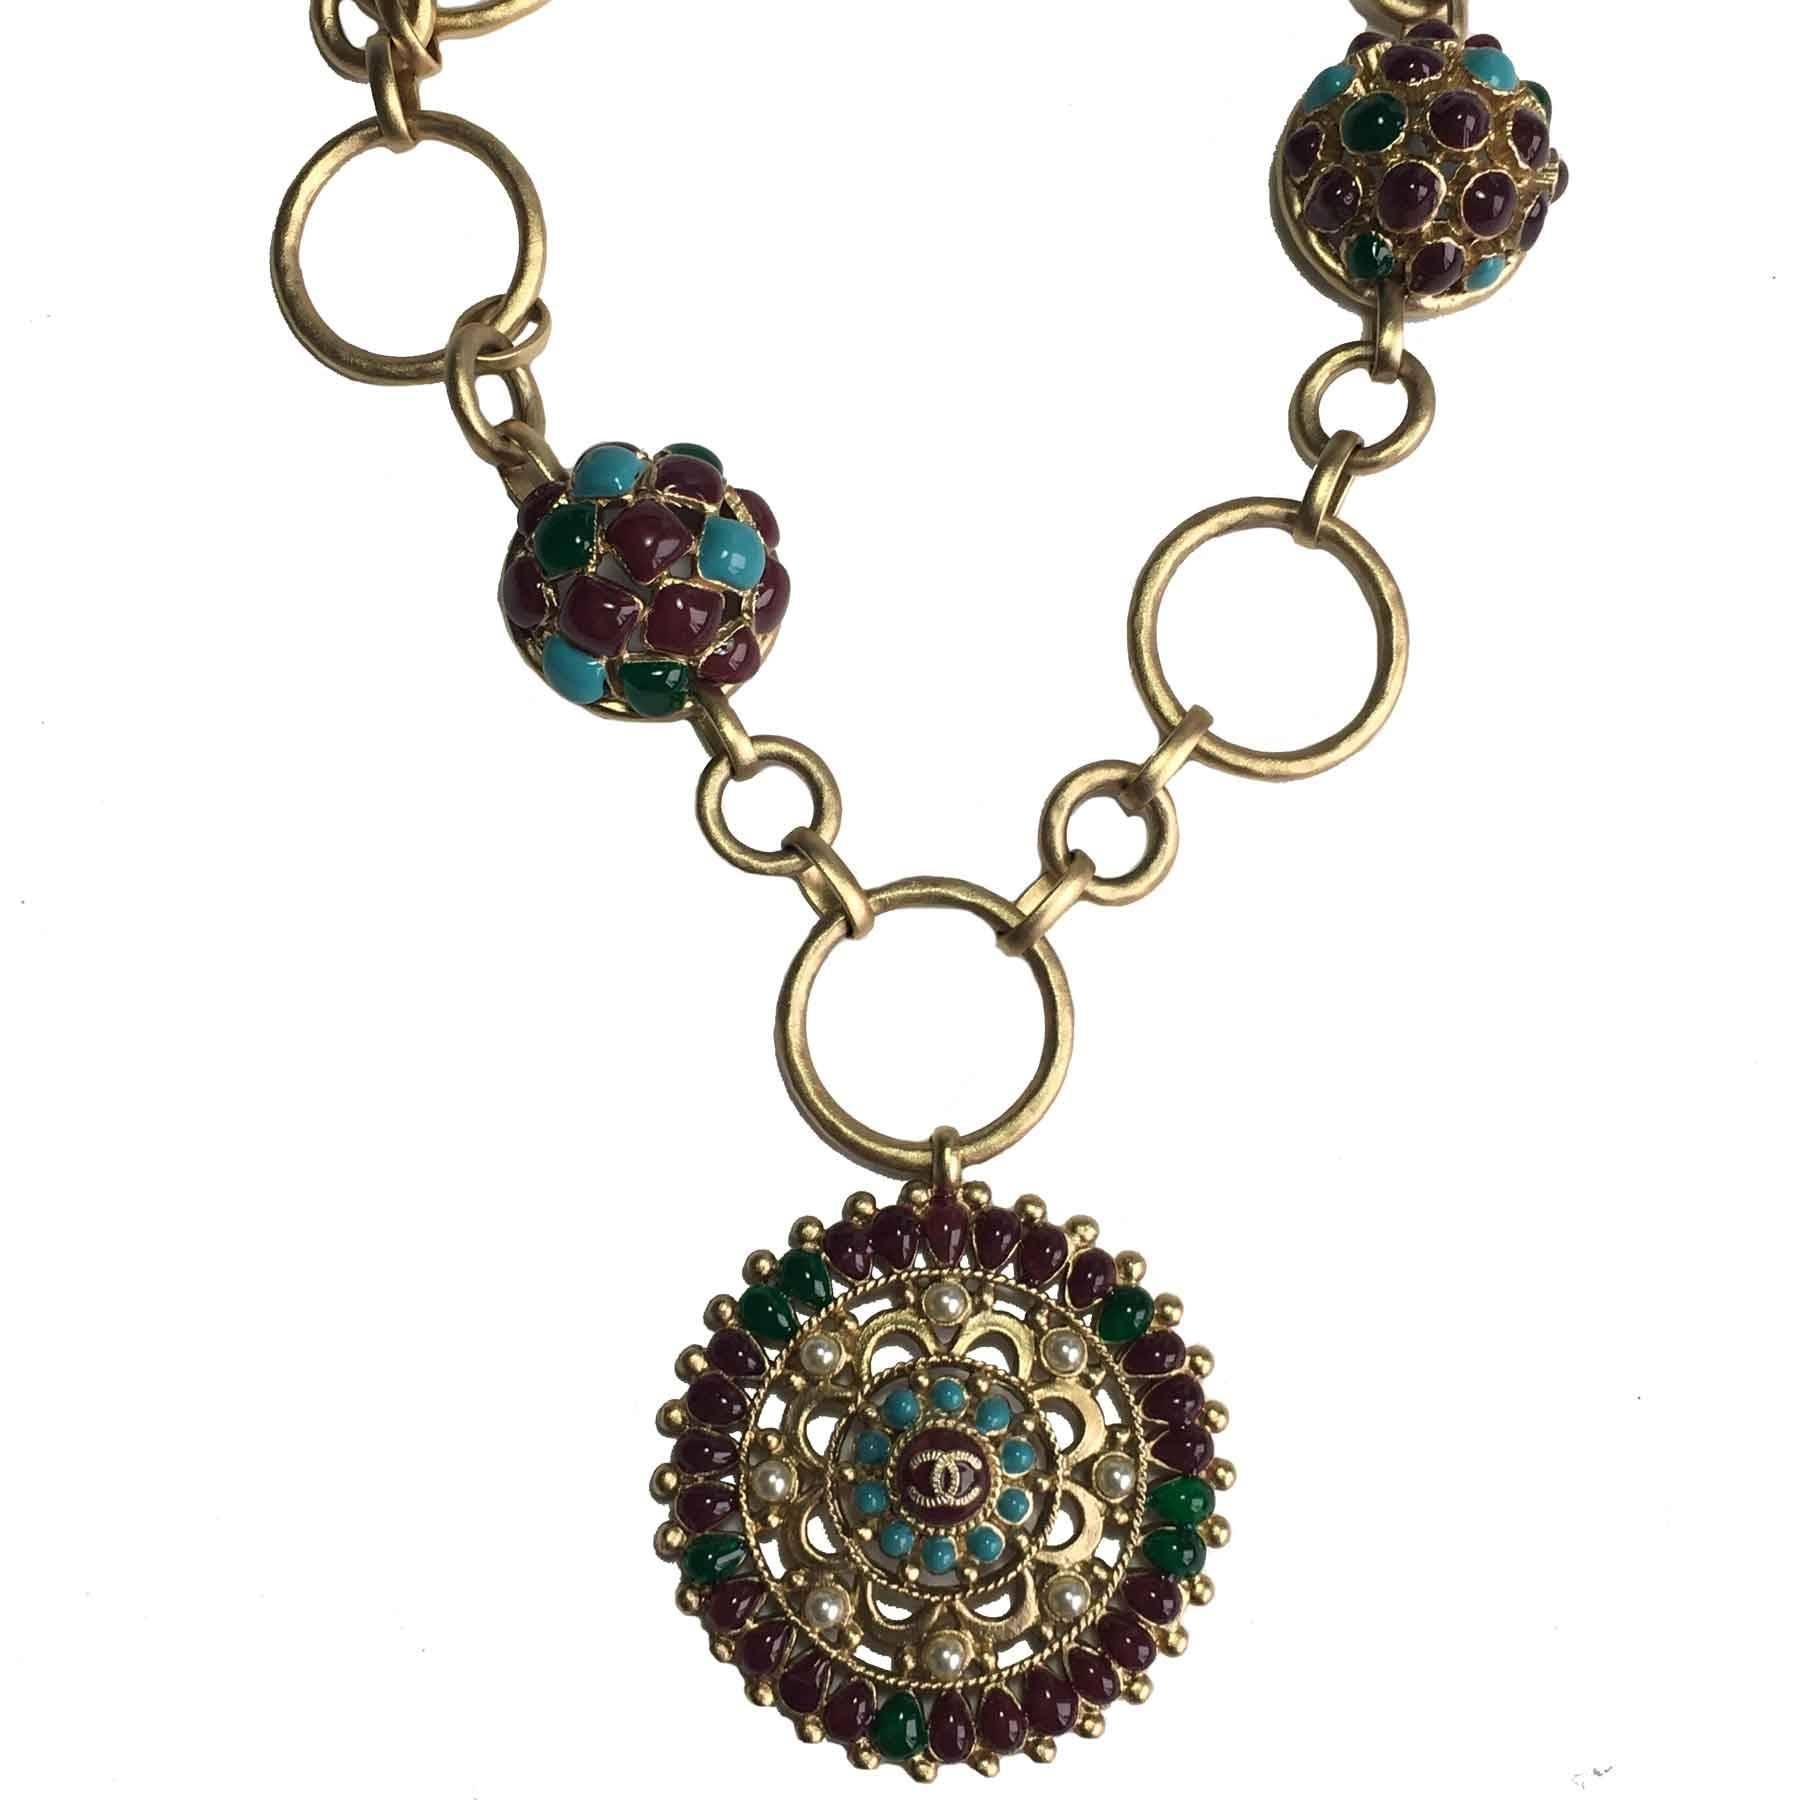 Superb Chanel necklace from the Métiers d'Arts 'Paris-Bombay' collection. Chain and pendant made of gilded matt gold, pearls and molten glass burgundy, turquoise and green. Two small chains end the collar at the clasp.

Dimensions: total length at